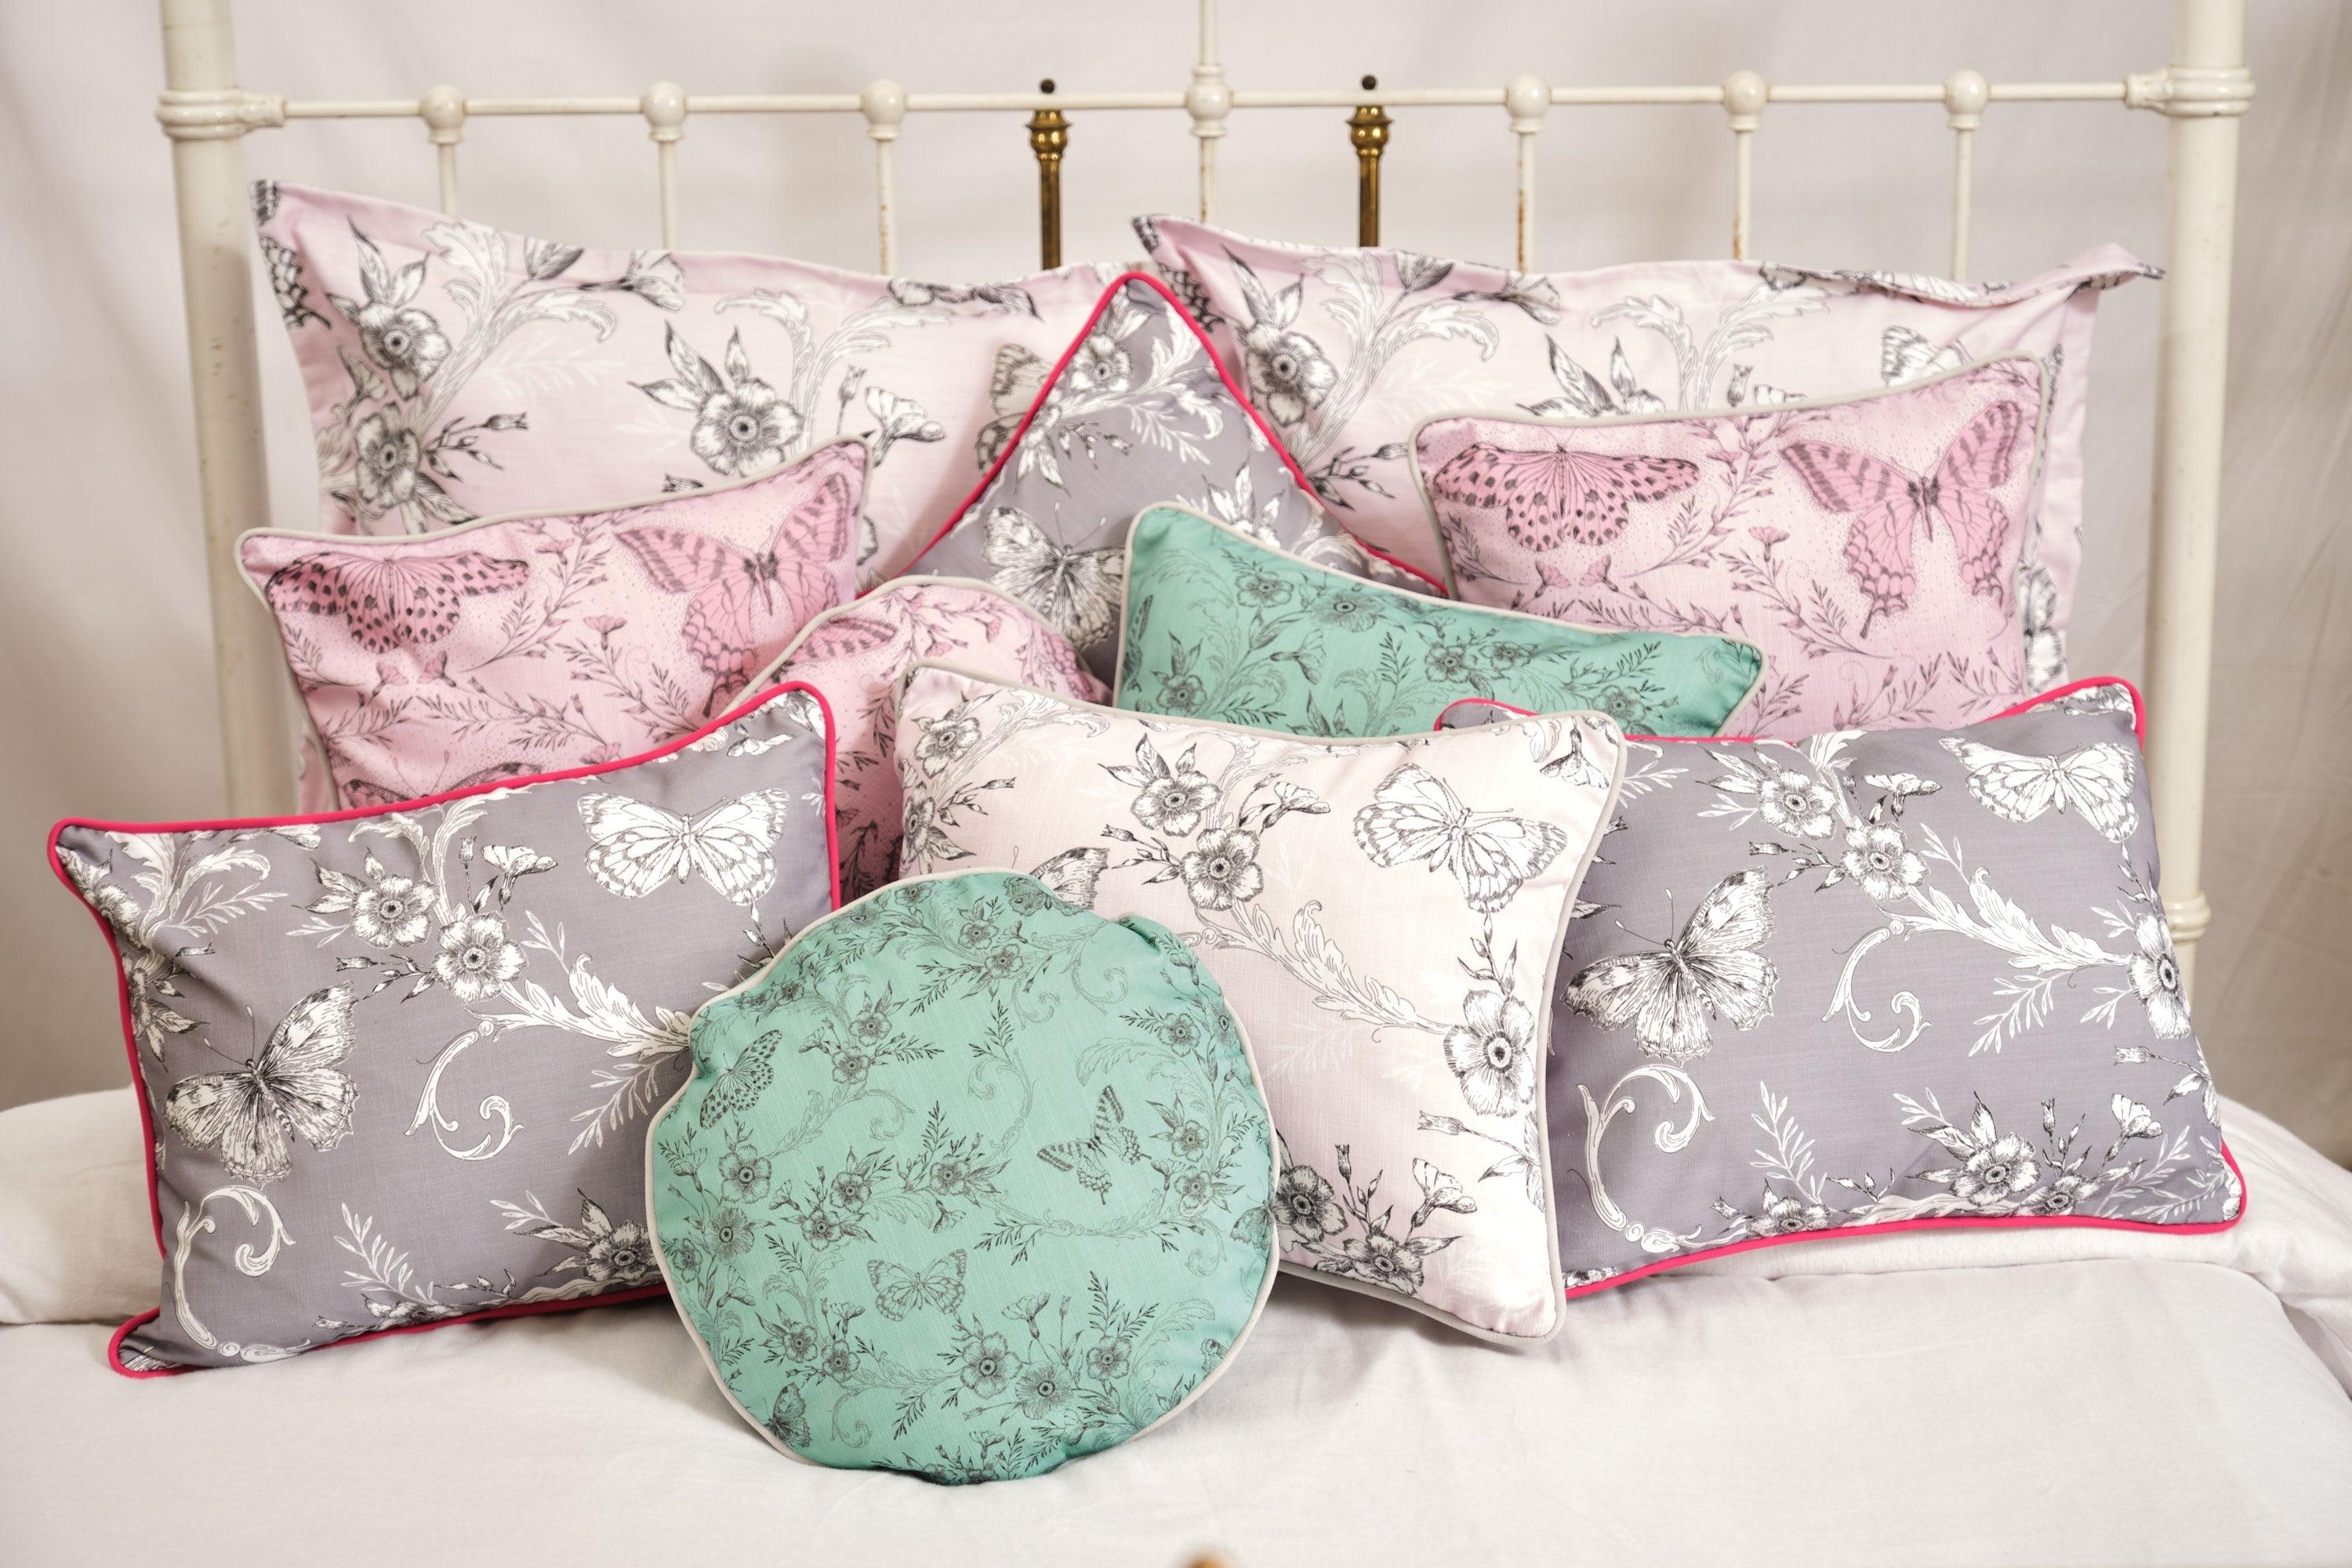 Trailing Butterfly Light Pink - House Of Turnowsky Cushion